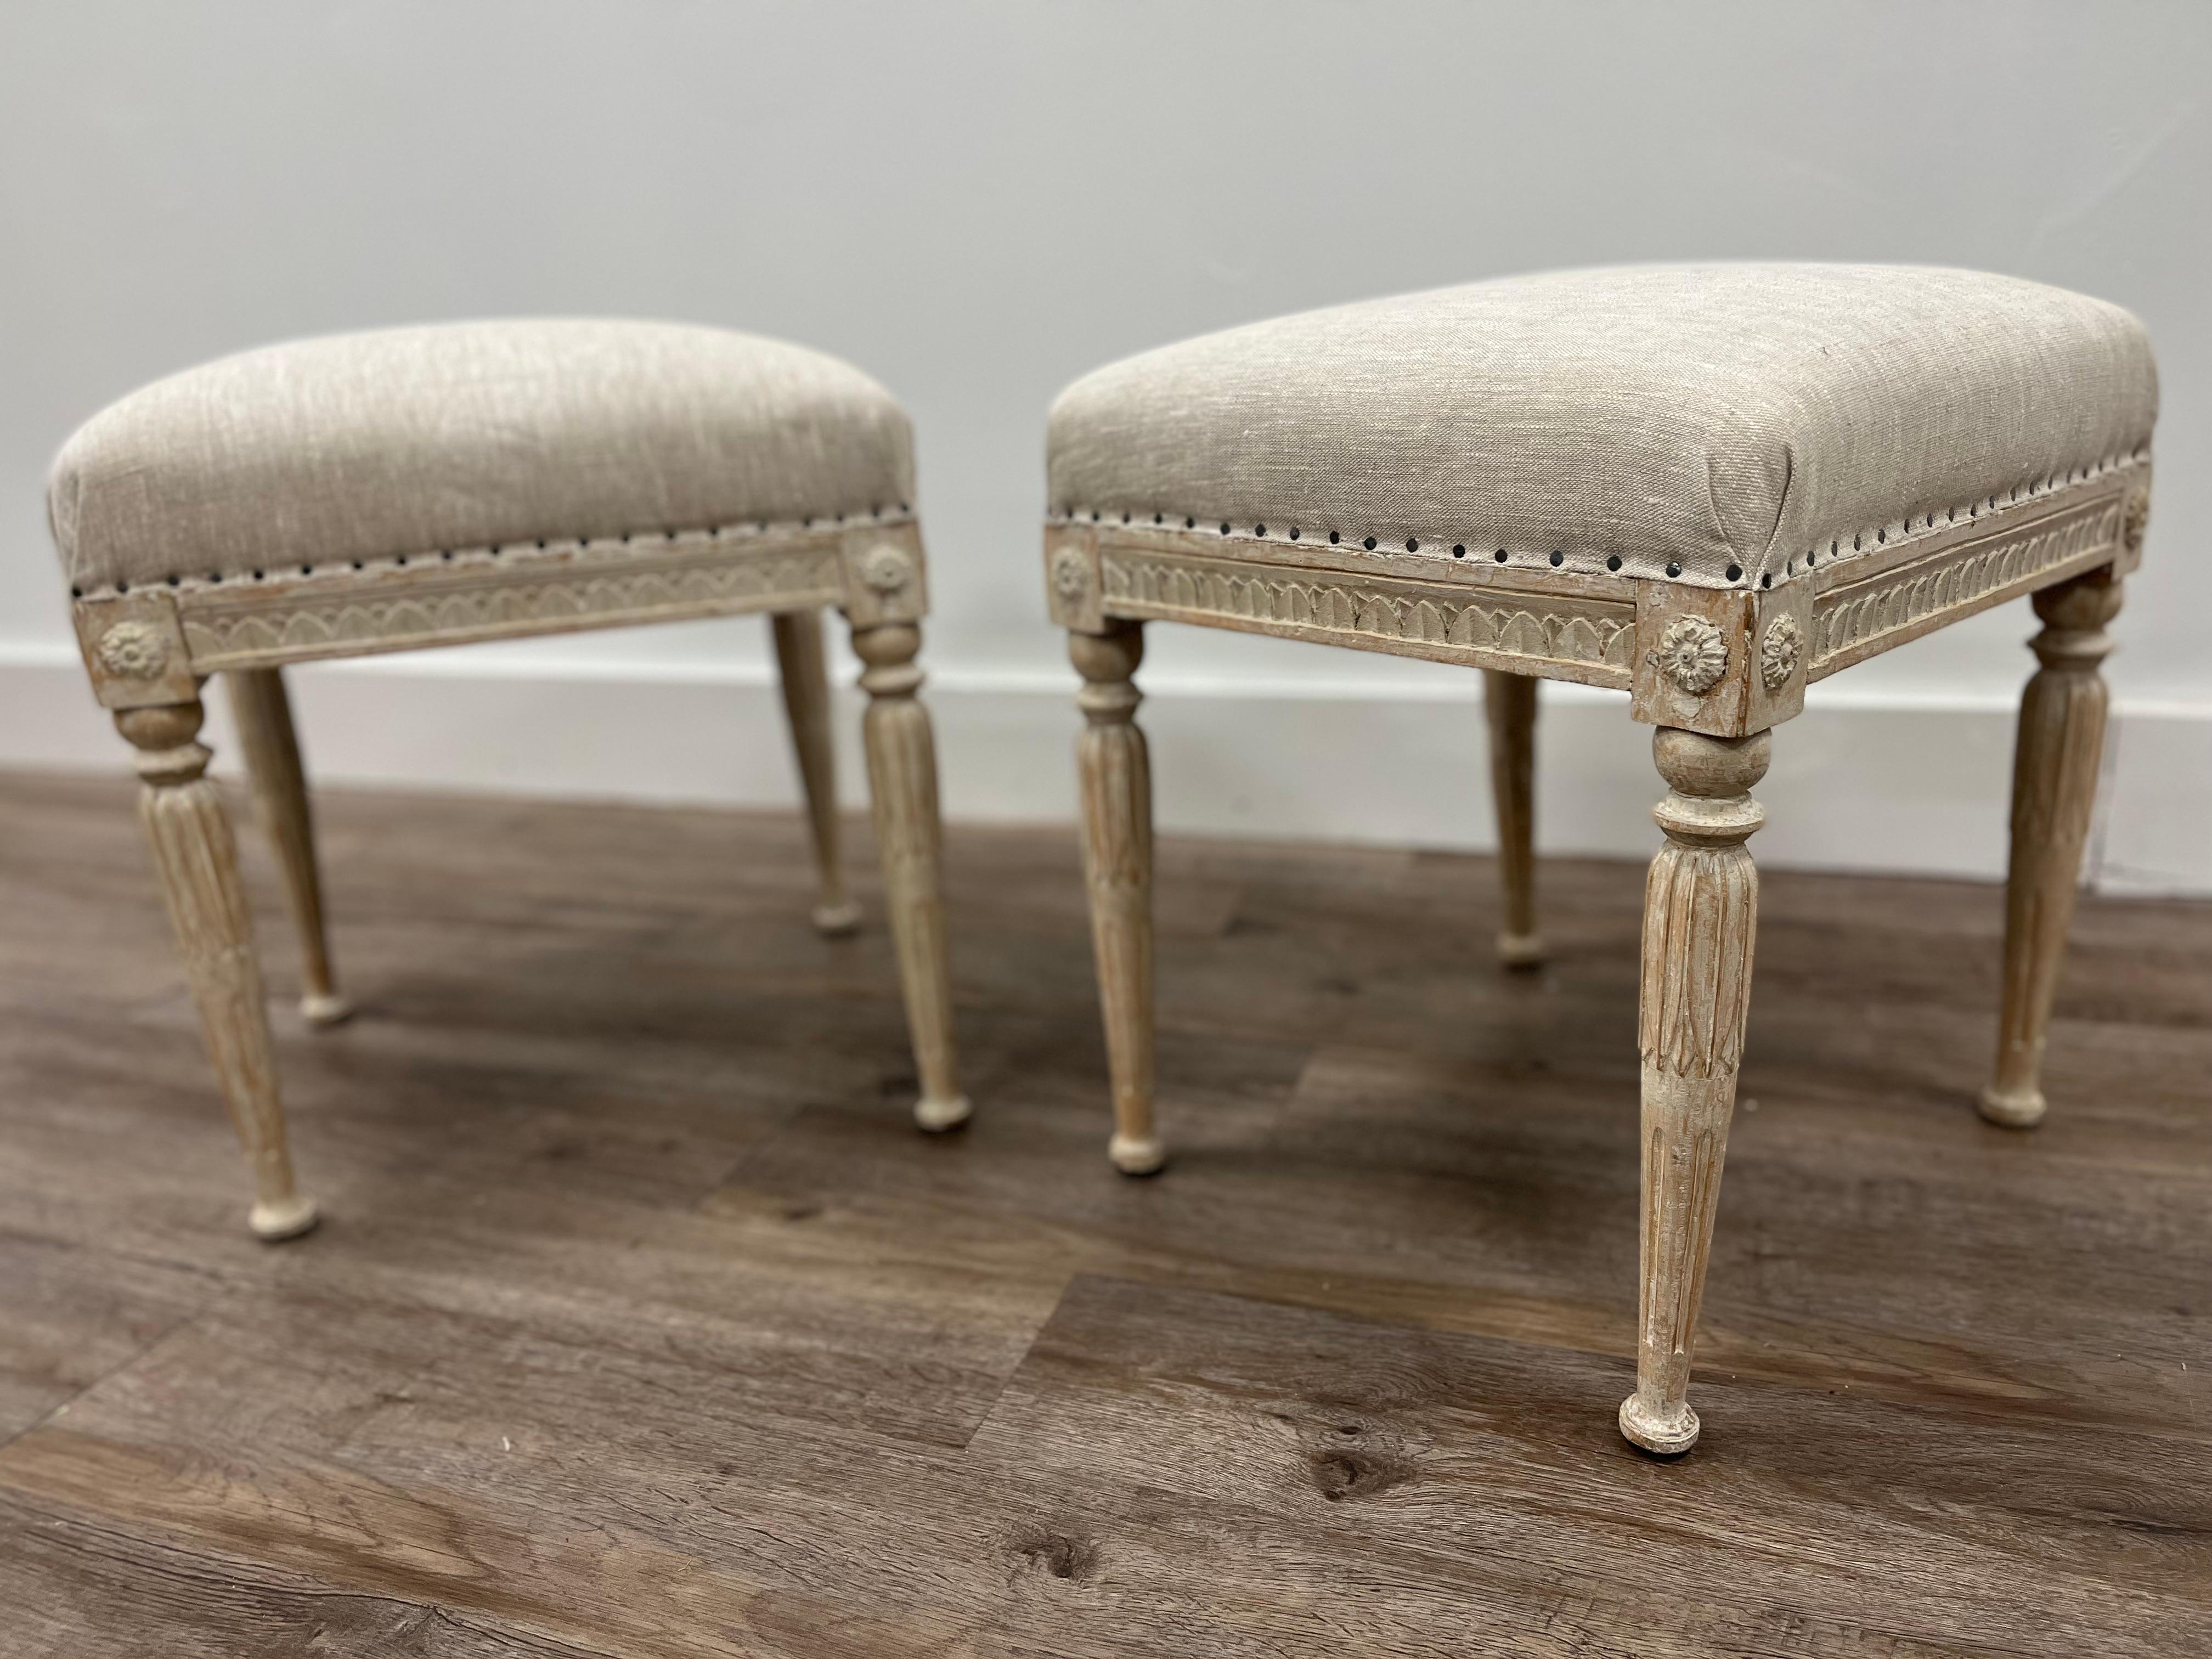 A rare pair of Gustavian footstools with Stockholm chairmaker’s seal on both. Frames are decorated with upright leaf cut. The corners meet in decorative medallions. The legs are finished with over-collaring atop elongated vertical leaf cut and